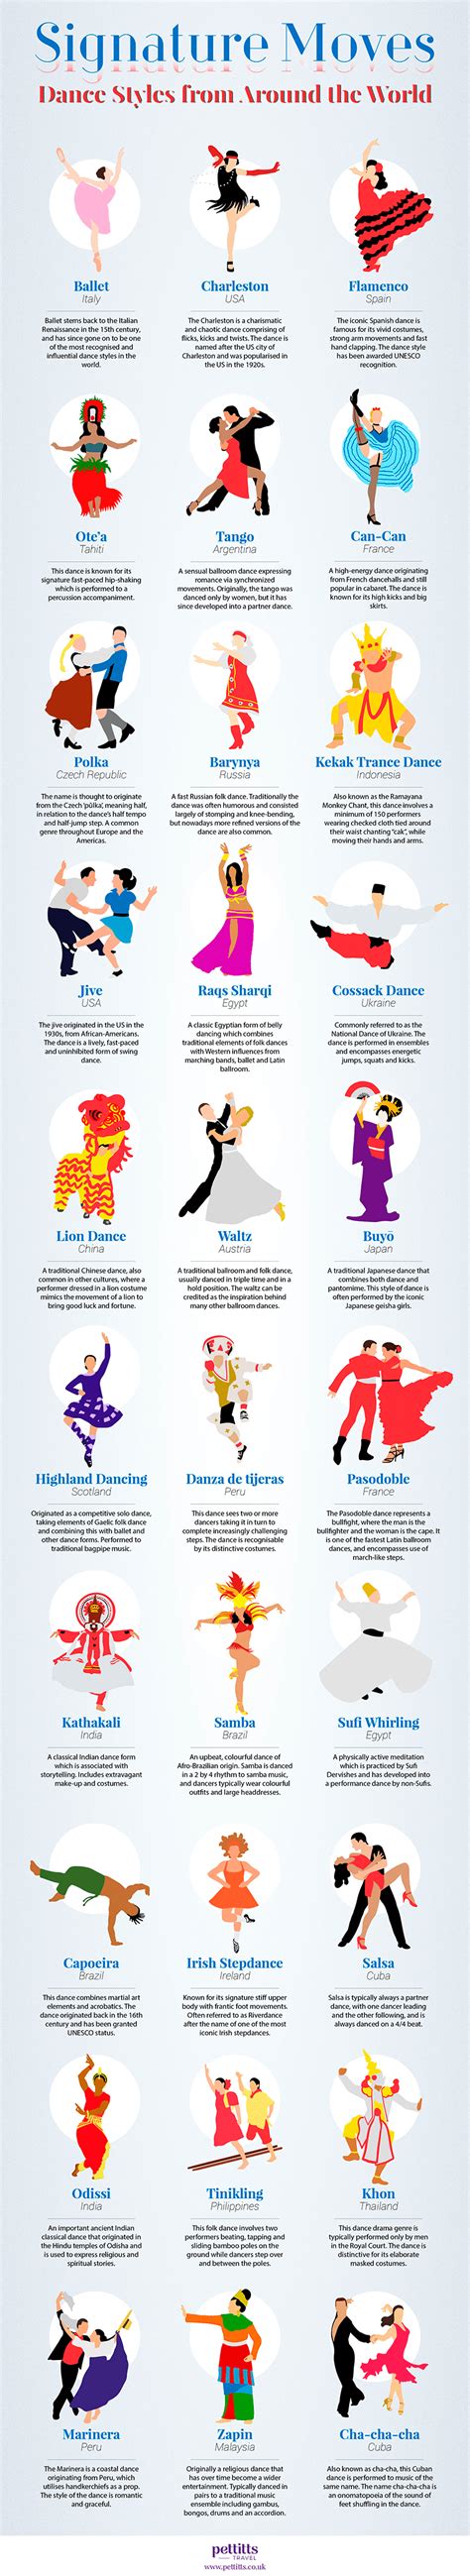 Signature Dance Moves A Trip Around The World Infographic Bit Rebels